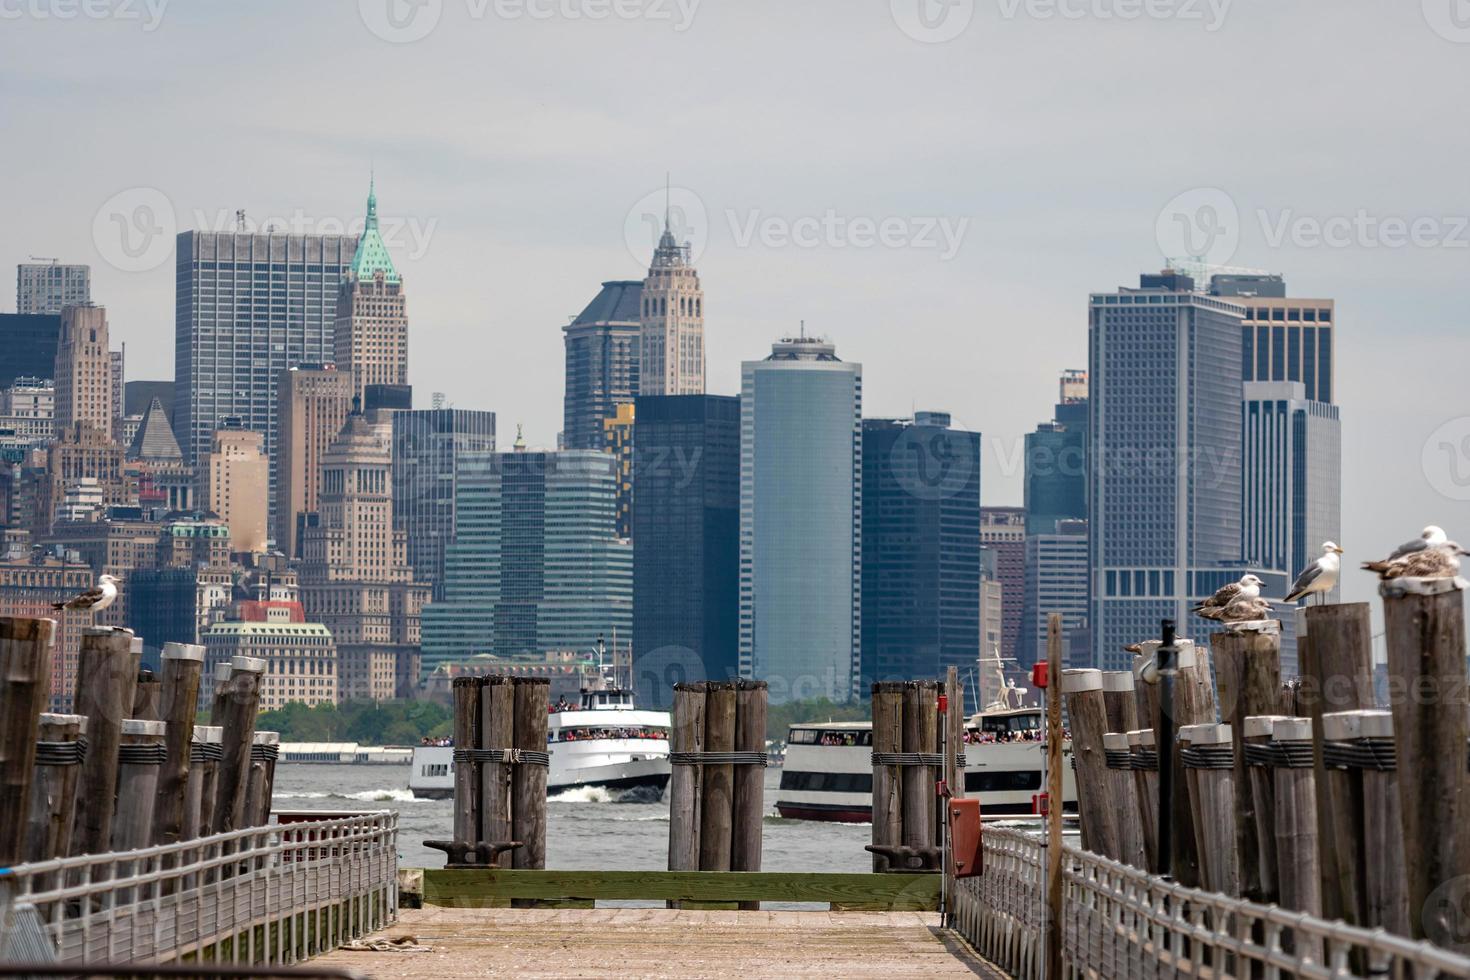 Seagulls at the Old Ferry Dock on Liberty Island near New York City, USA - Image photo